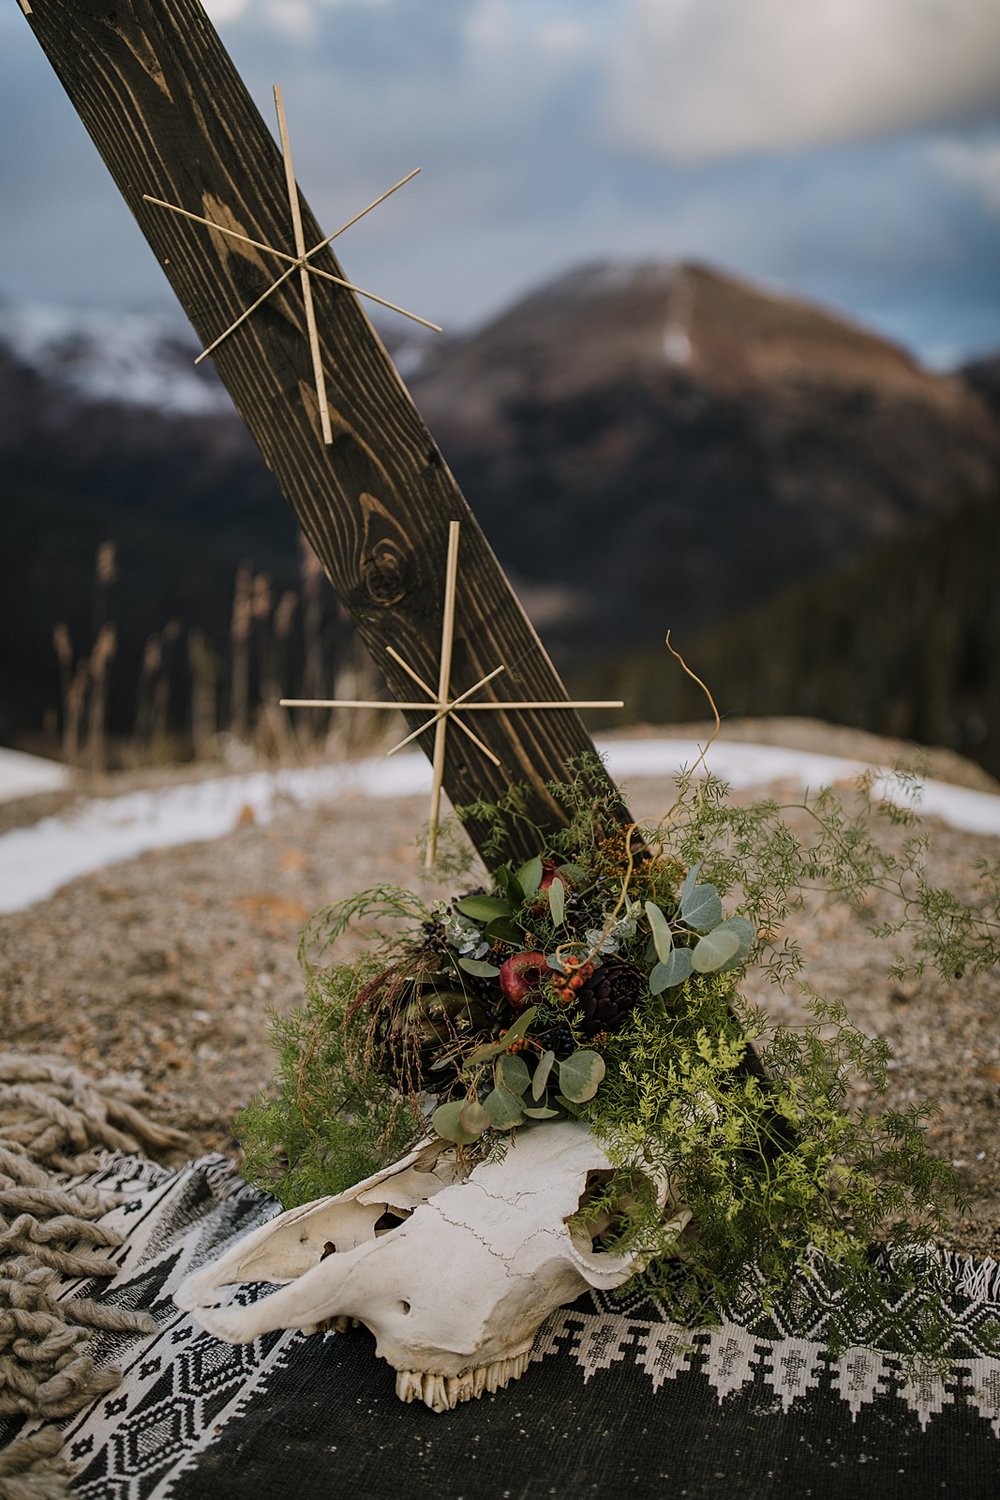 terrestrial wedding decor at the base of the arch, taxidermy wedding decorations, cattle skull wedding decor, animal skull wedding decor, florals with pomegranates, dried fruit and berry fall florals